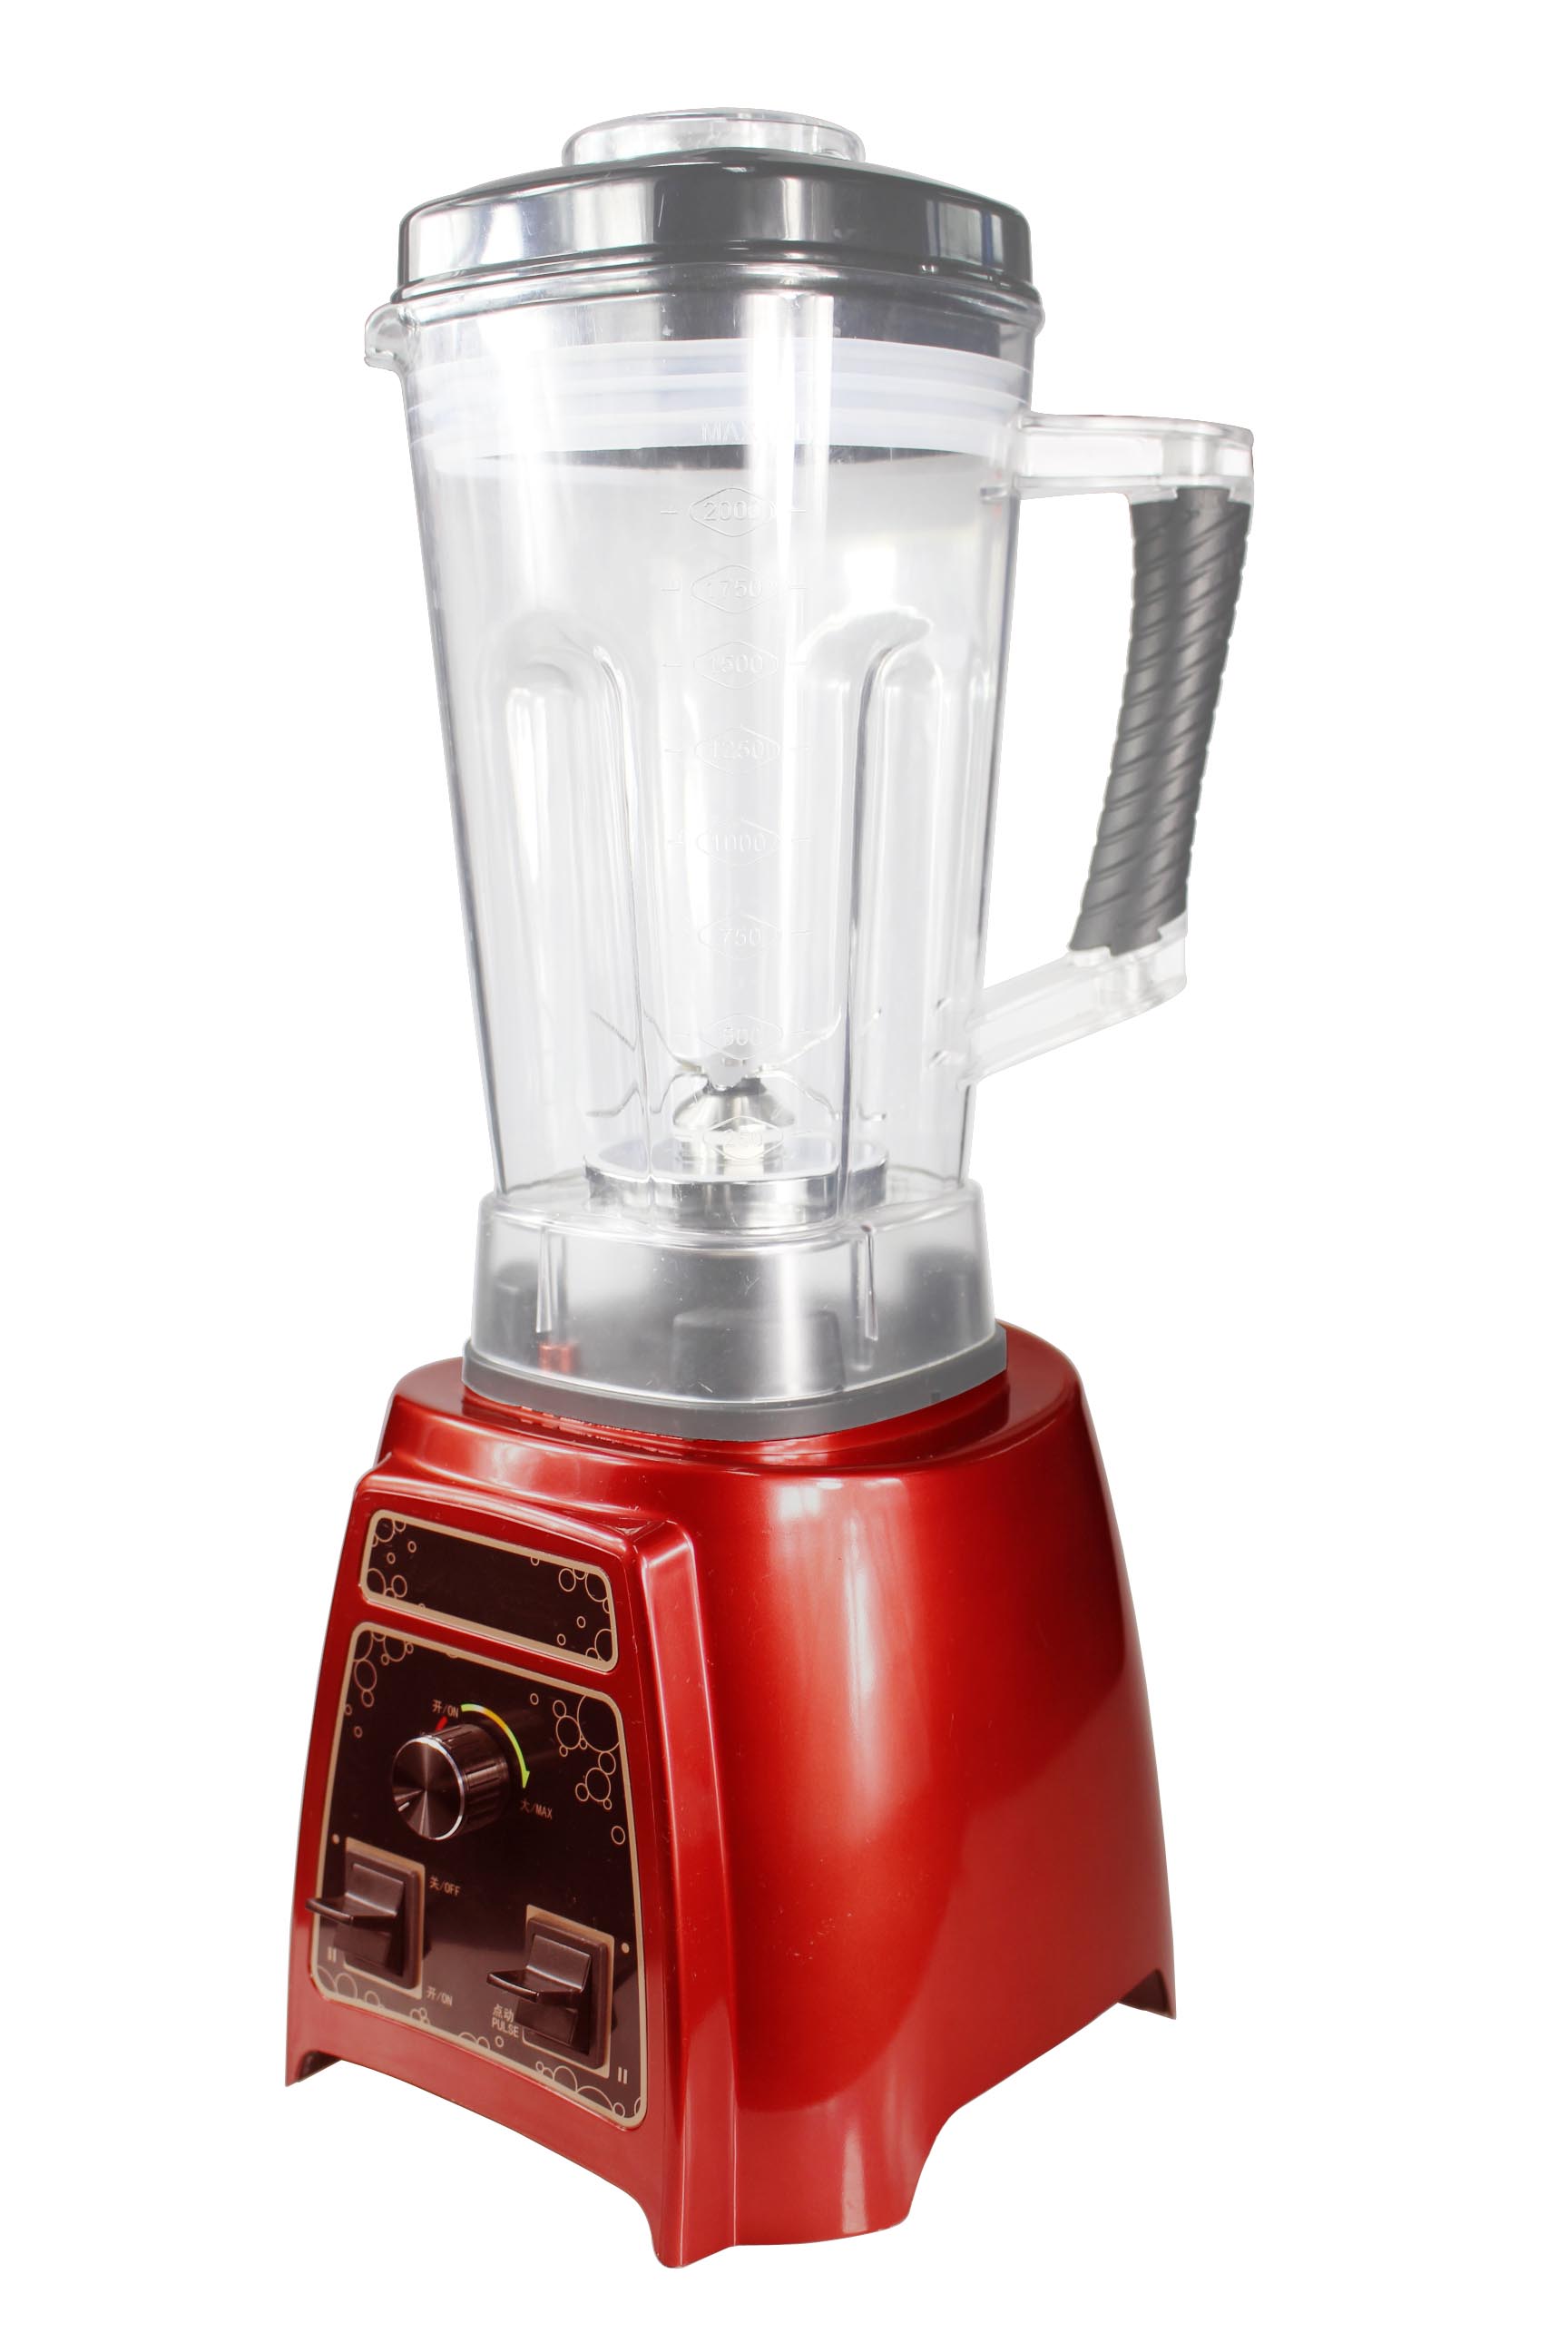 Blender 2000mL 1500W Stand Unbreakable Jar Ice-crushing-Red